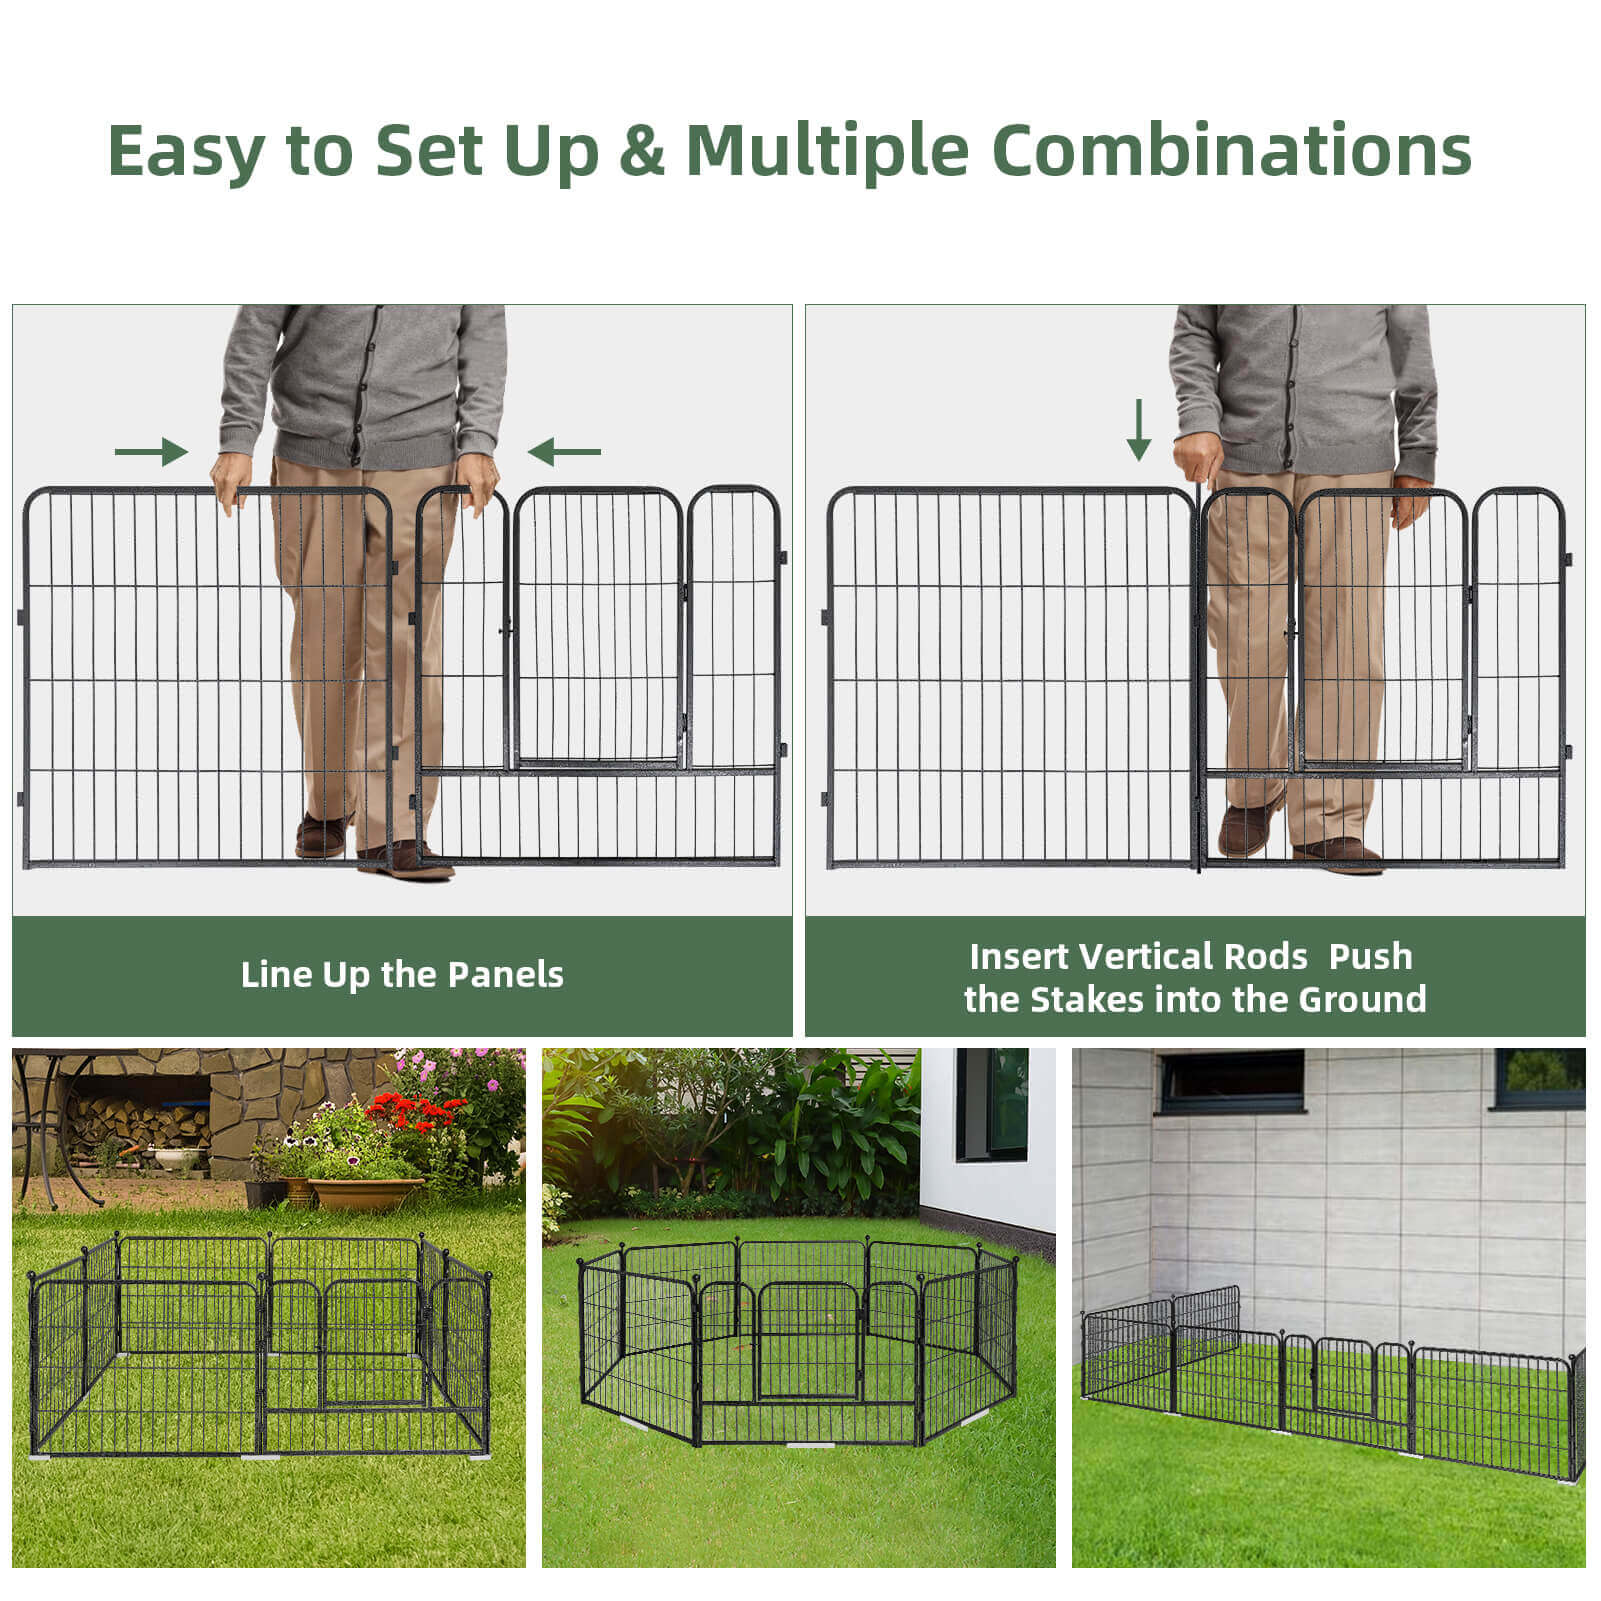 Elecwish High-Security Pet Fences is easy to set up and multiple combinations